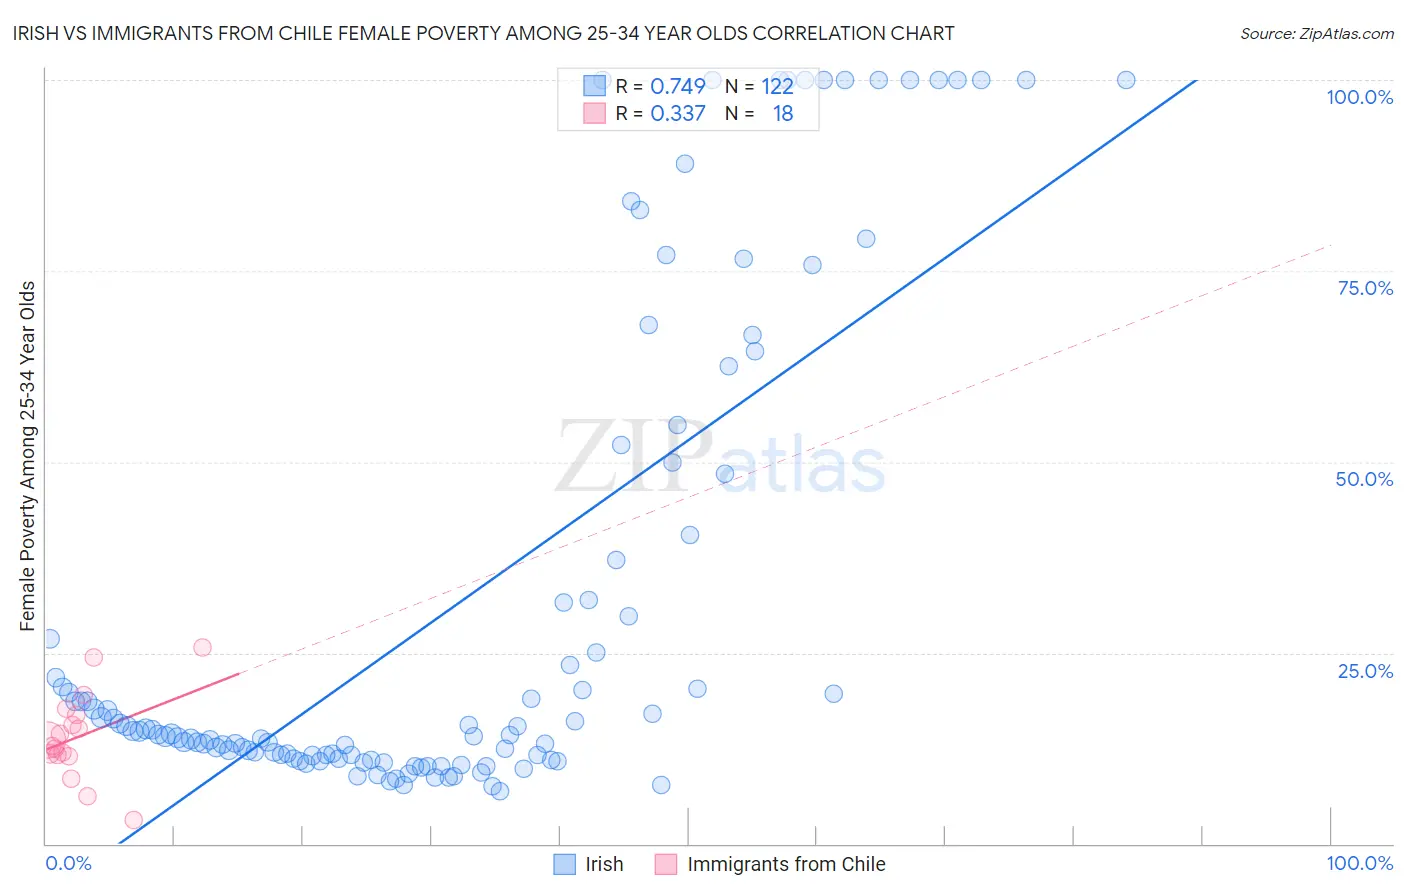 Irish vs Immigrants from Chile Female Poverty Among 25-34 Year Olds